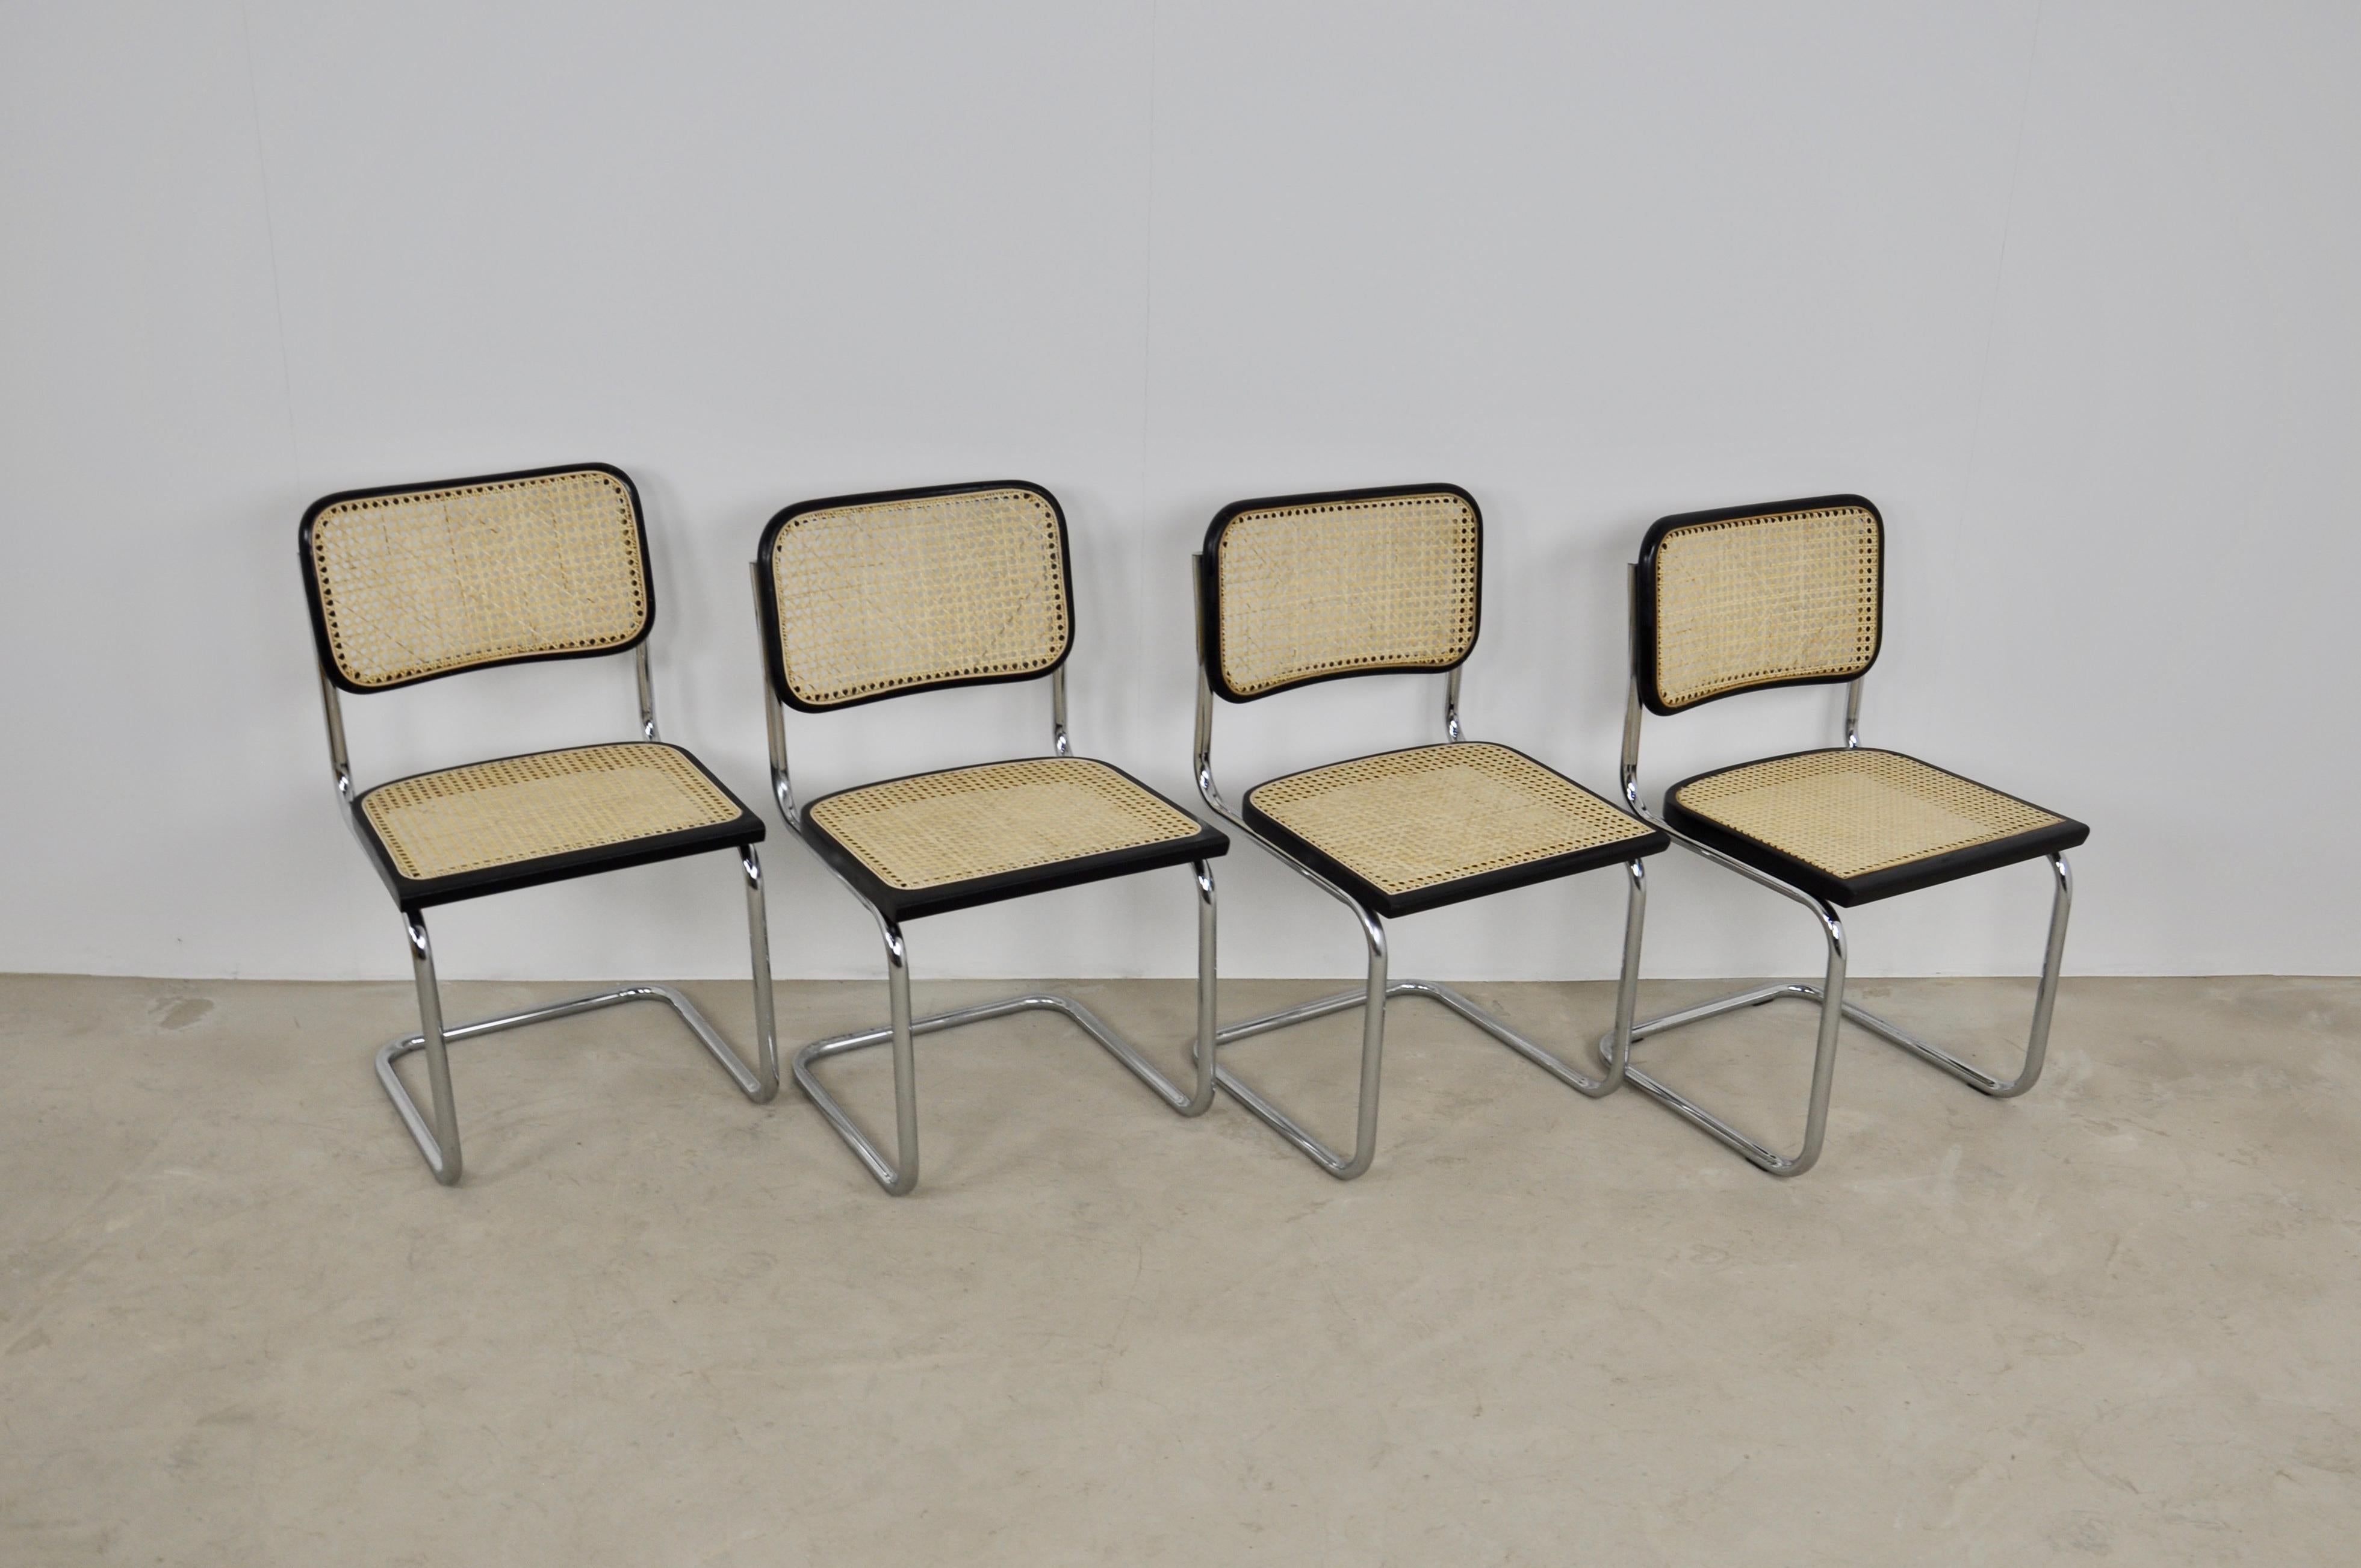 Set of 4 chairs in metal, wood and cane. Cane in perfect condition. Light wear due to time and use (1980s). Measures: Seat height 45cm.